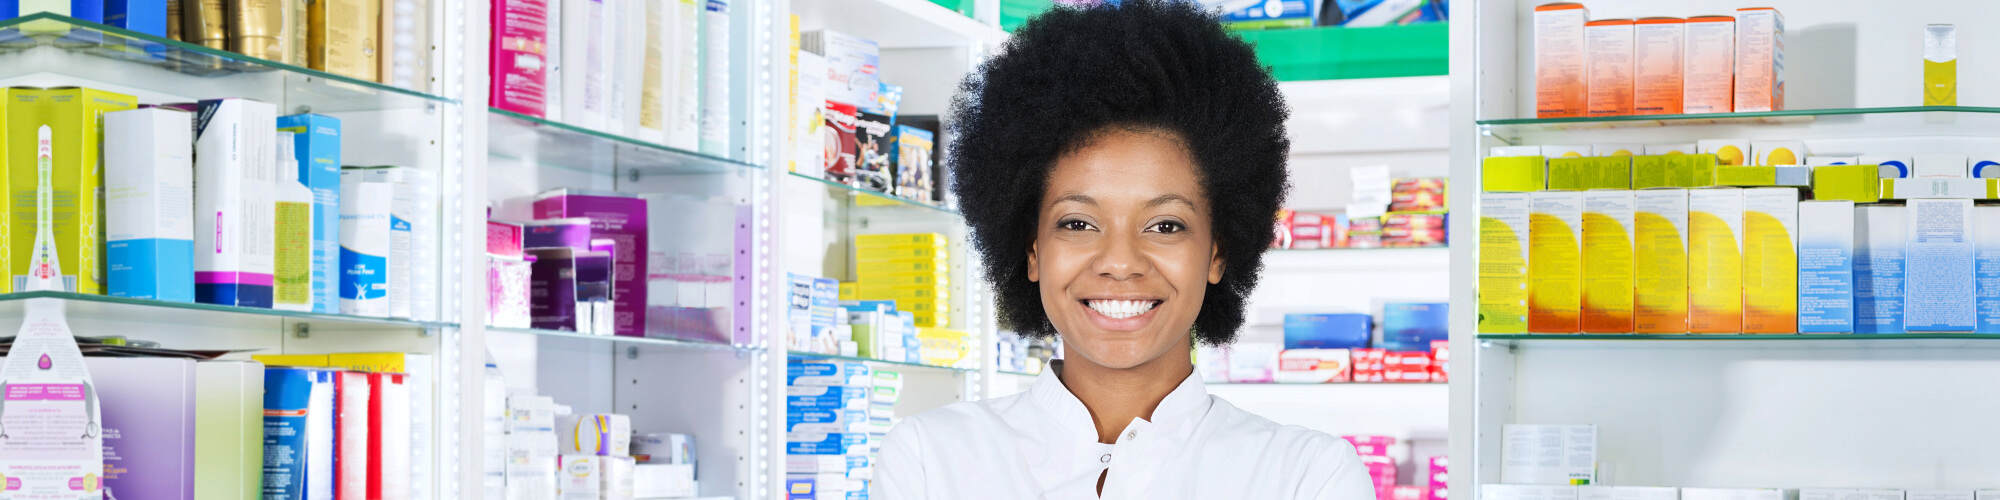 pharmacist with curly hair